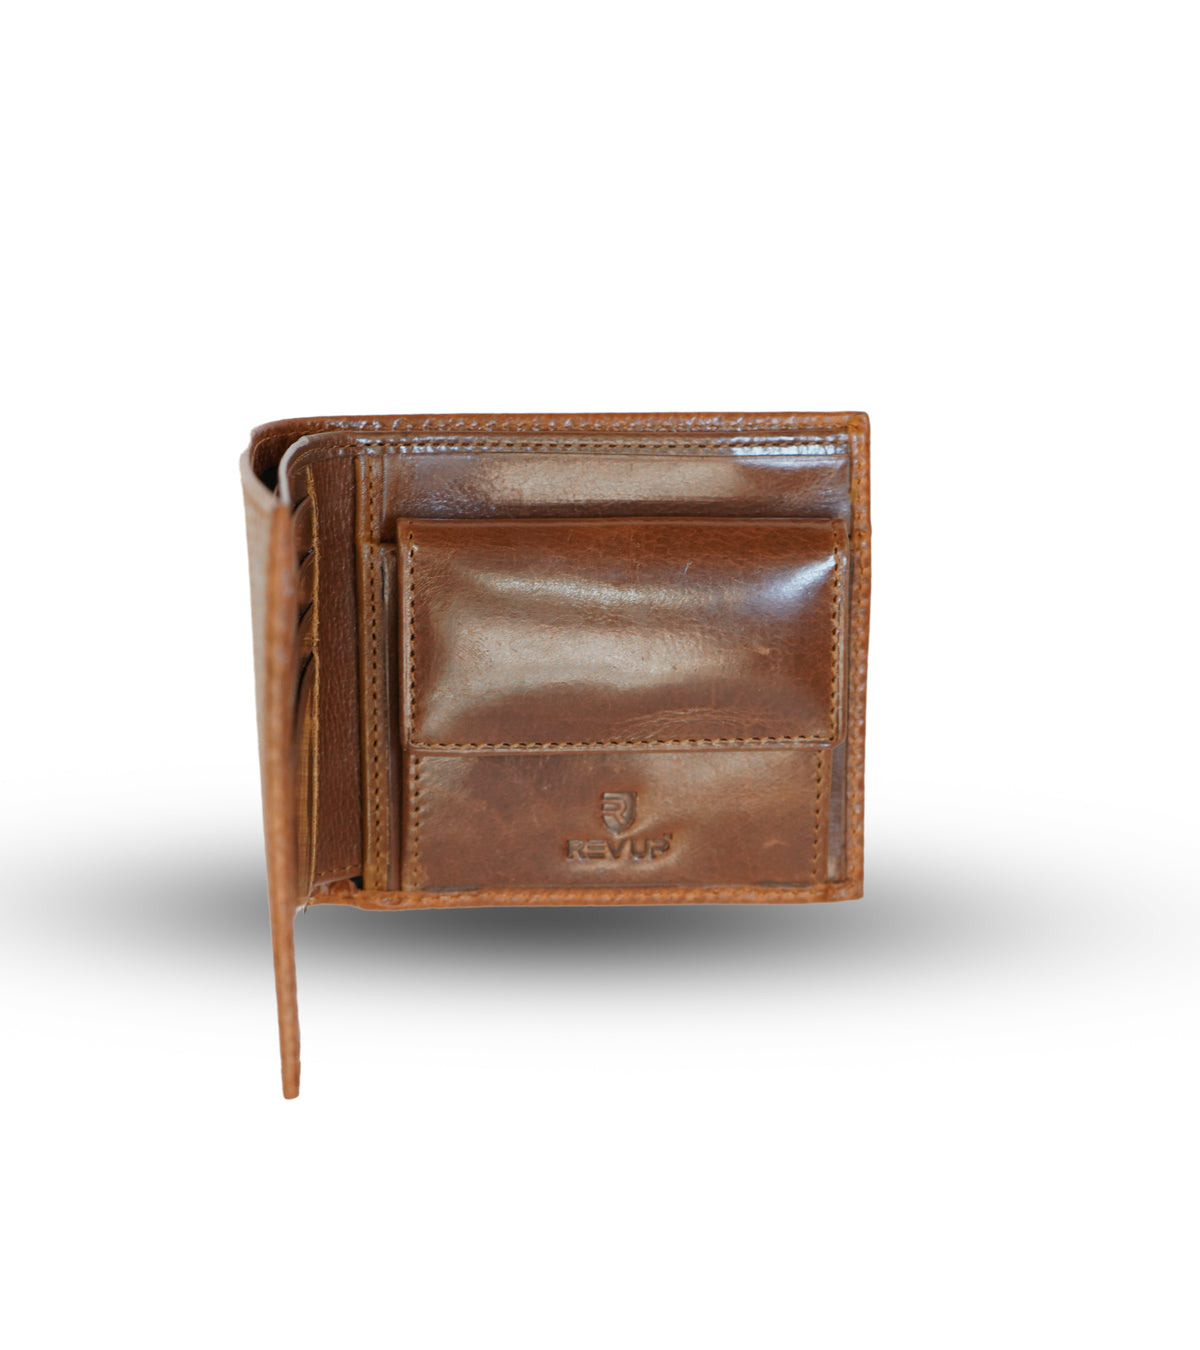 Brown glossy leather men's wallet